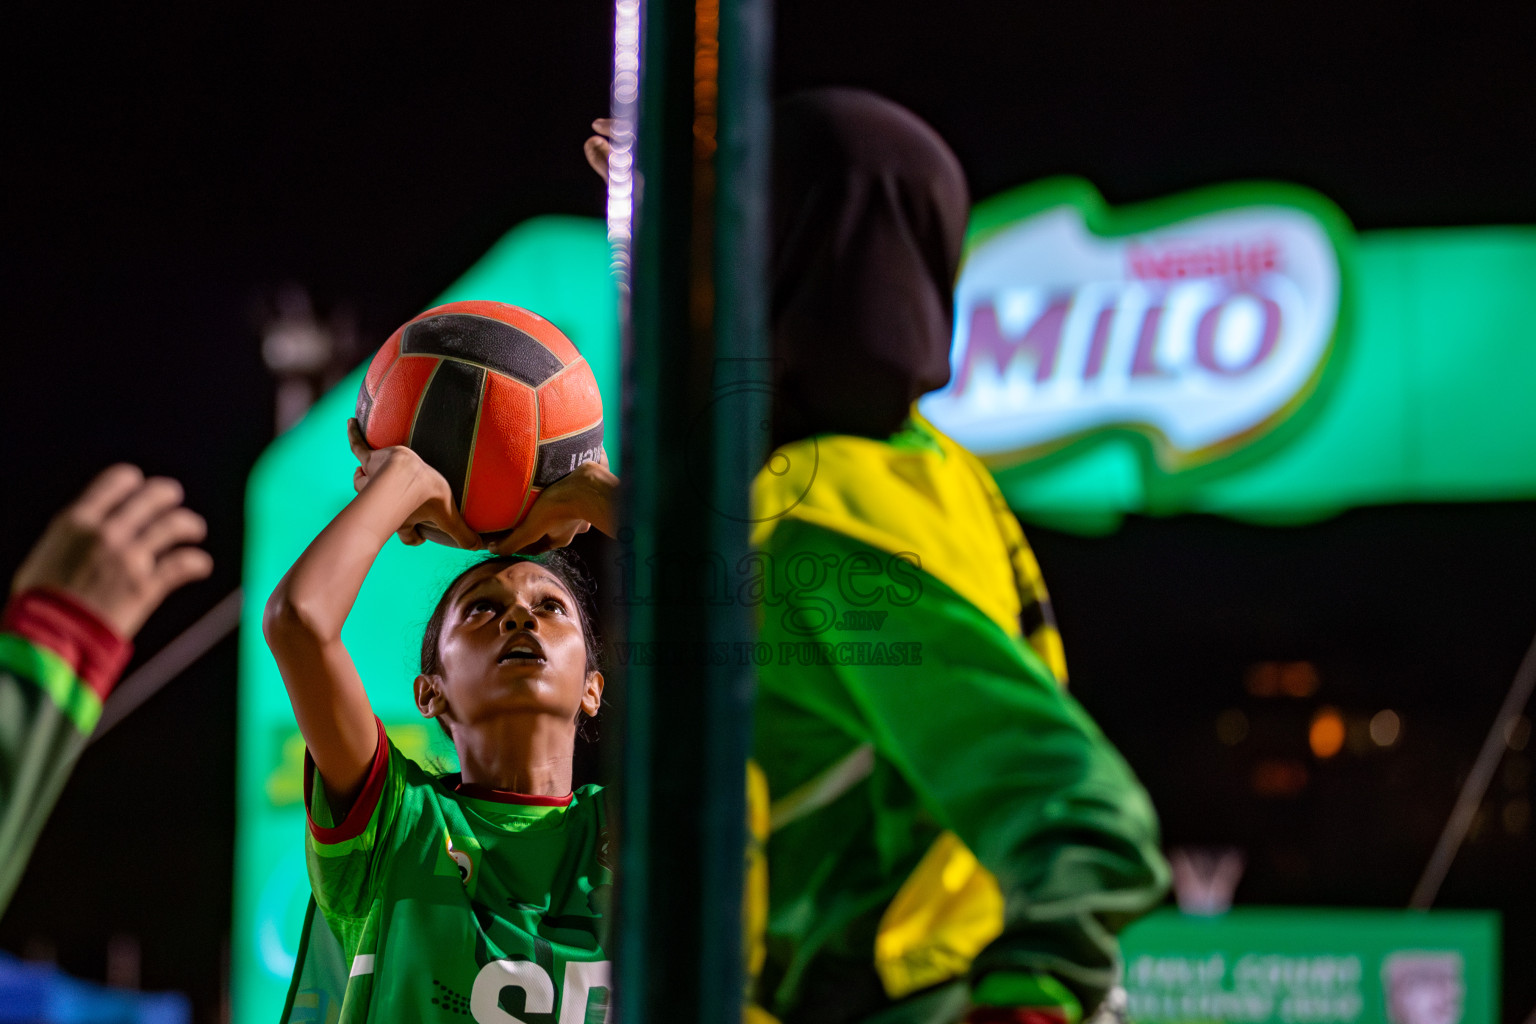 Milo Ramadan Half Court Netball Challenge was held from 21st to 25th March, in Central Park, Hulhumale, Male', Maldives